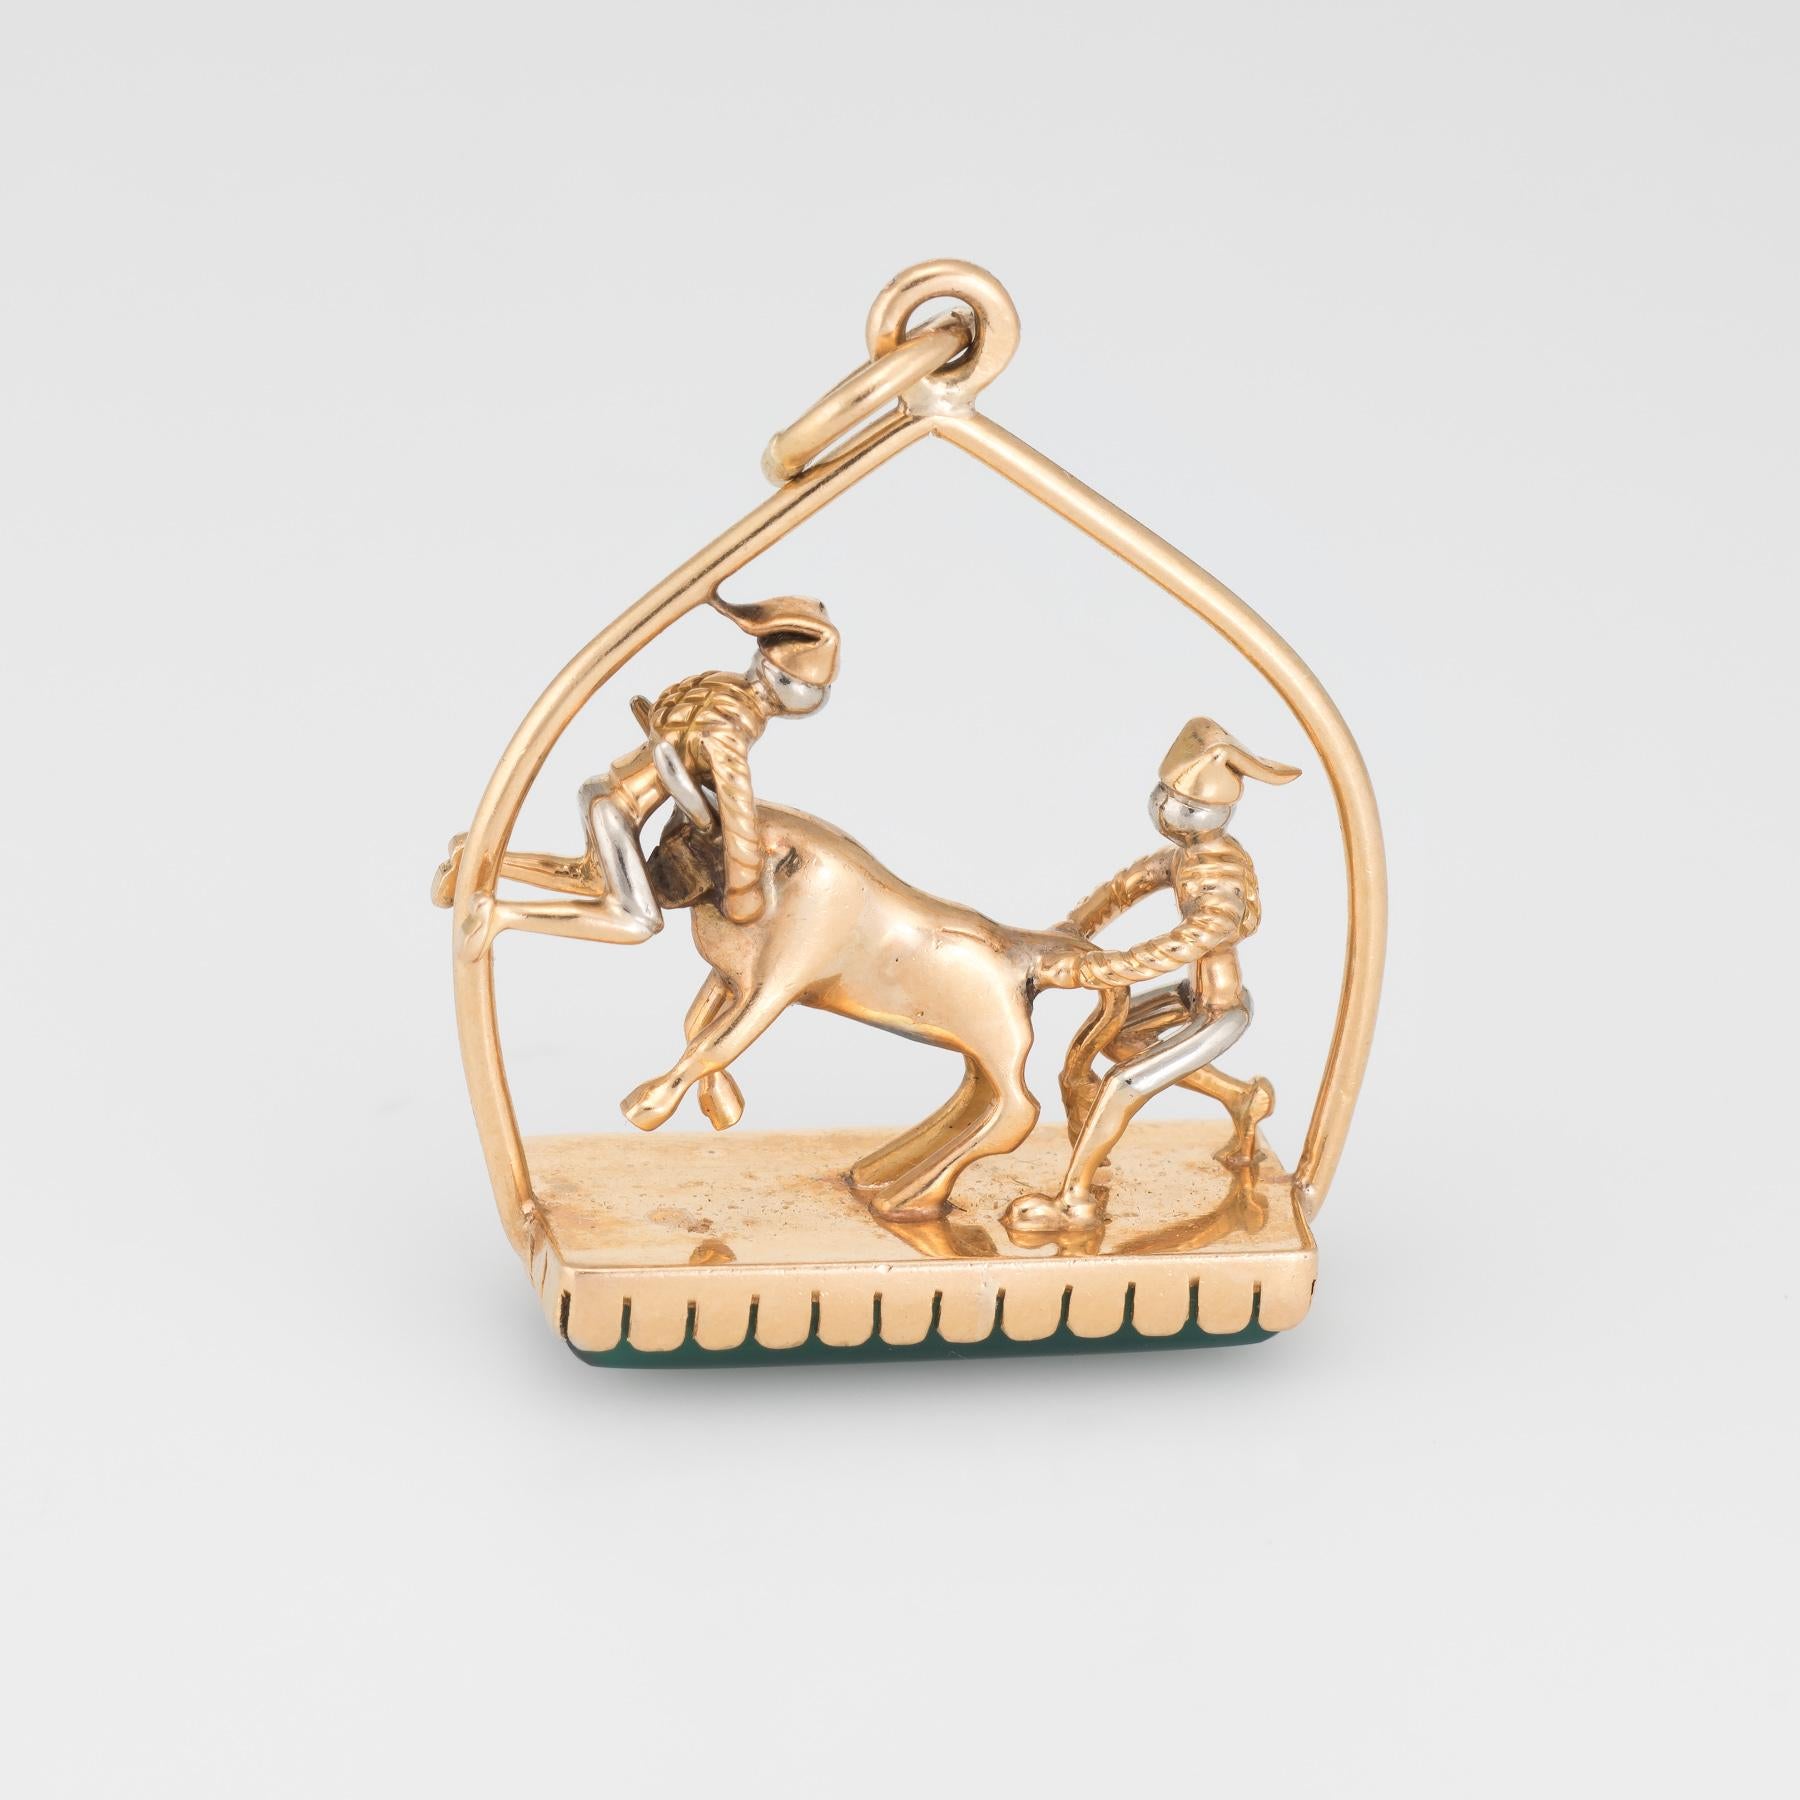 Finely detailed vintage Matador pendant or charm, crafted in 18 karat yellow gold. 

Chrysoprase measures 20mm x 9mm. The chrysoprase is in excellent condition and free of cracks or chips.

The detailed figural features a bull fighting scene with a